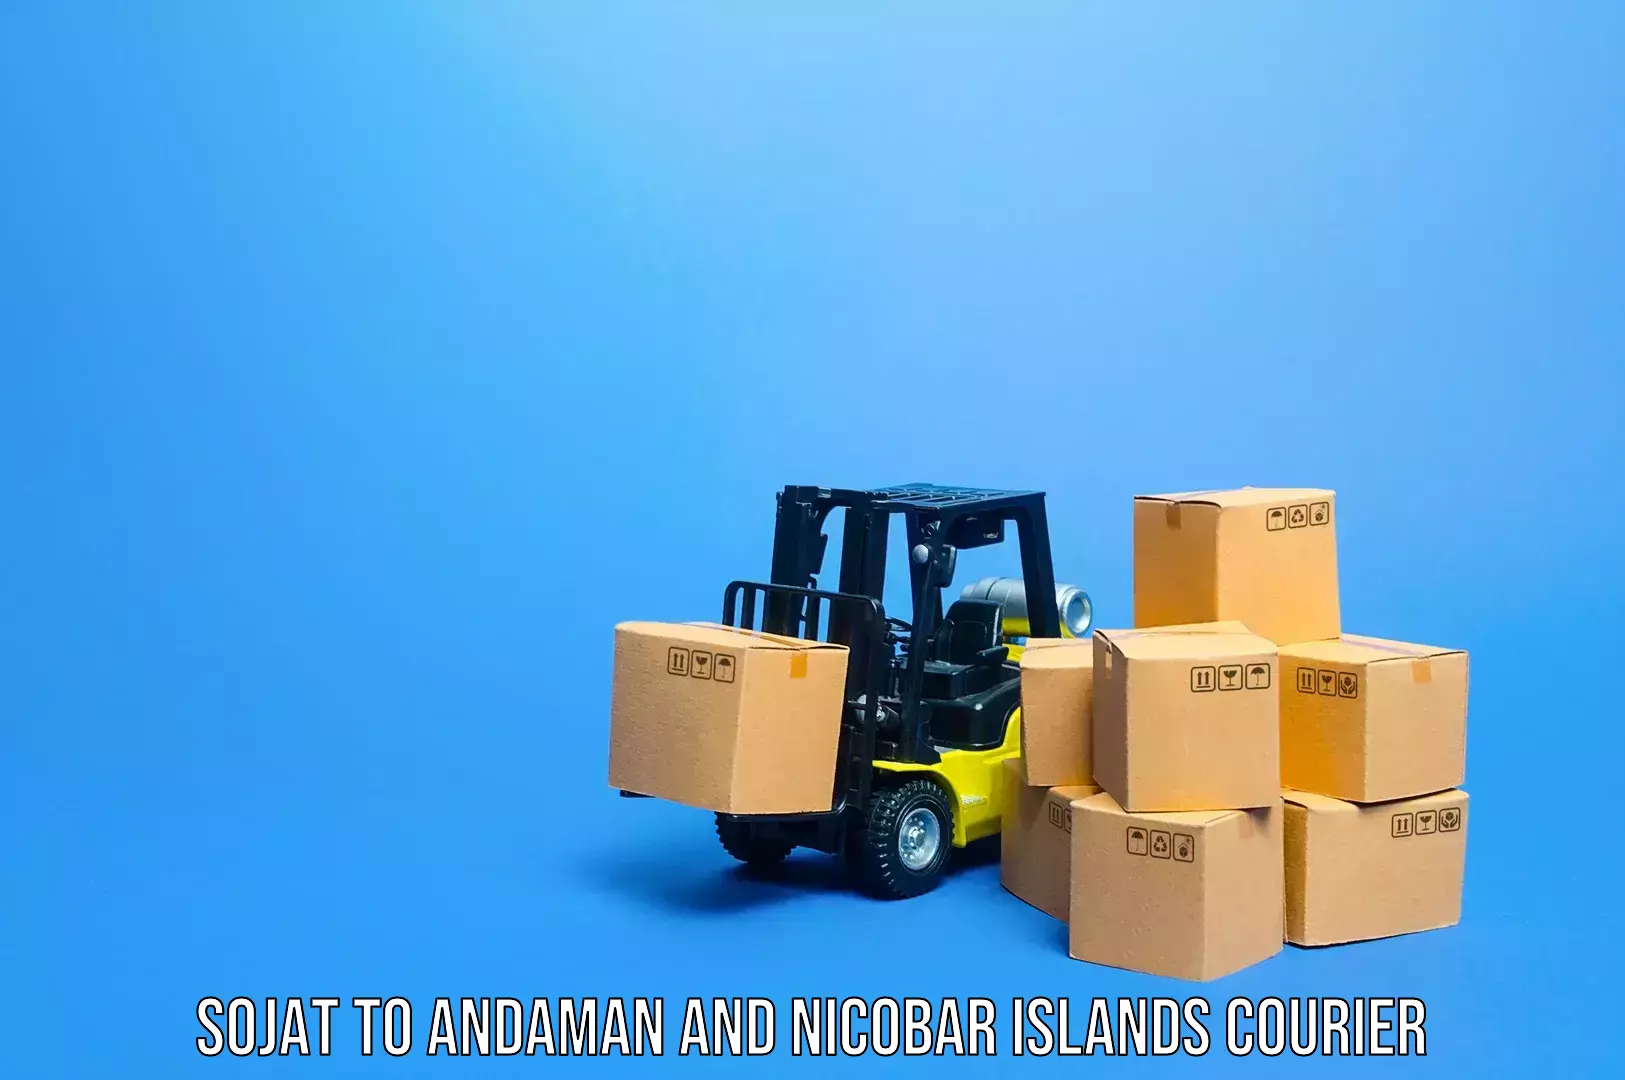 Student luggage transport in Sojat to Andaman and Nicobar Islands